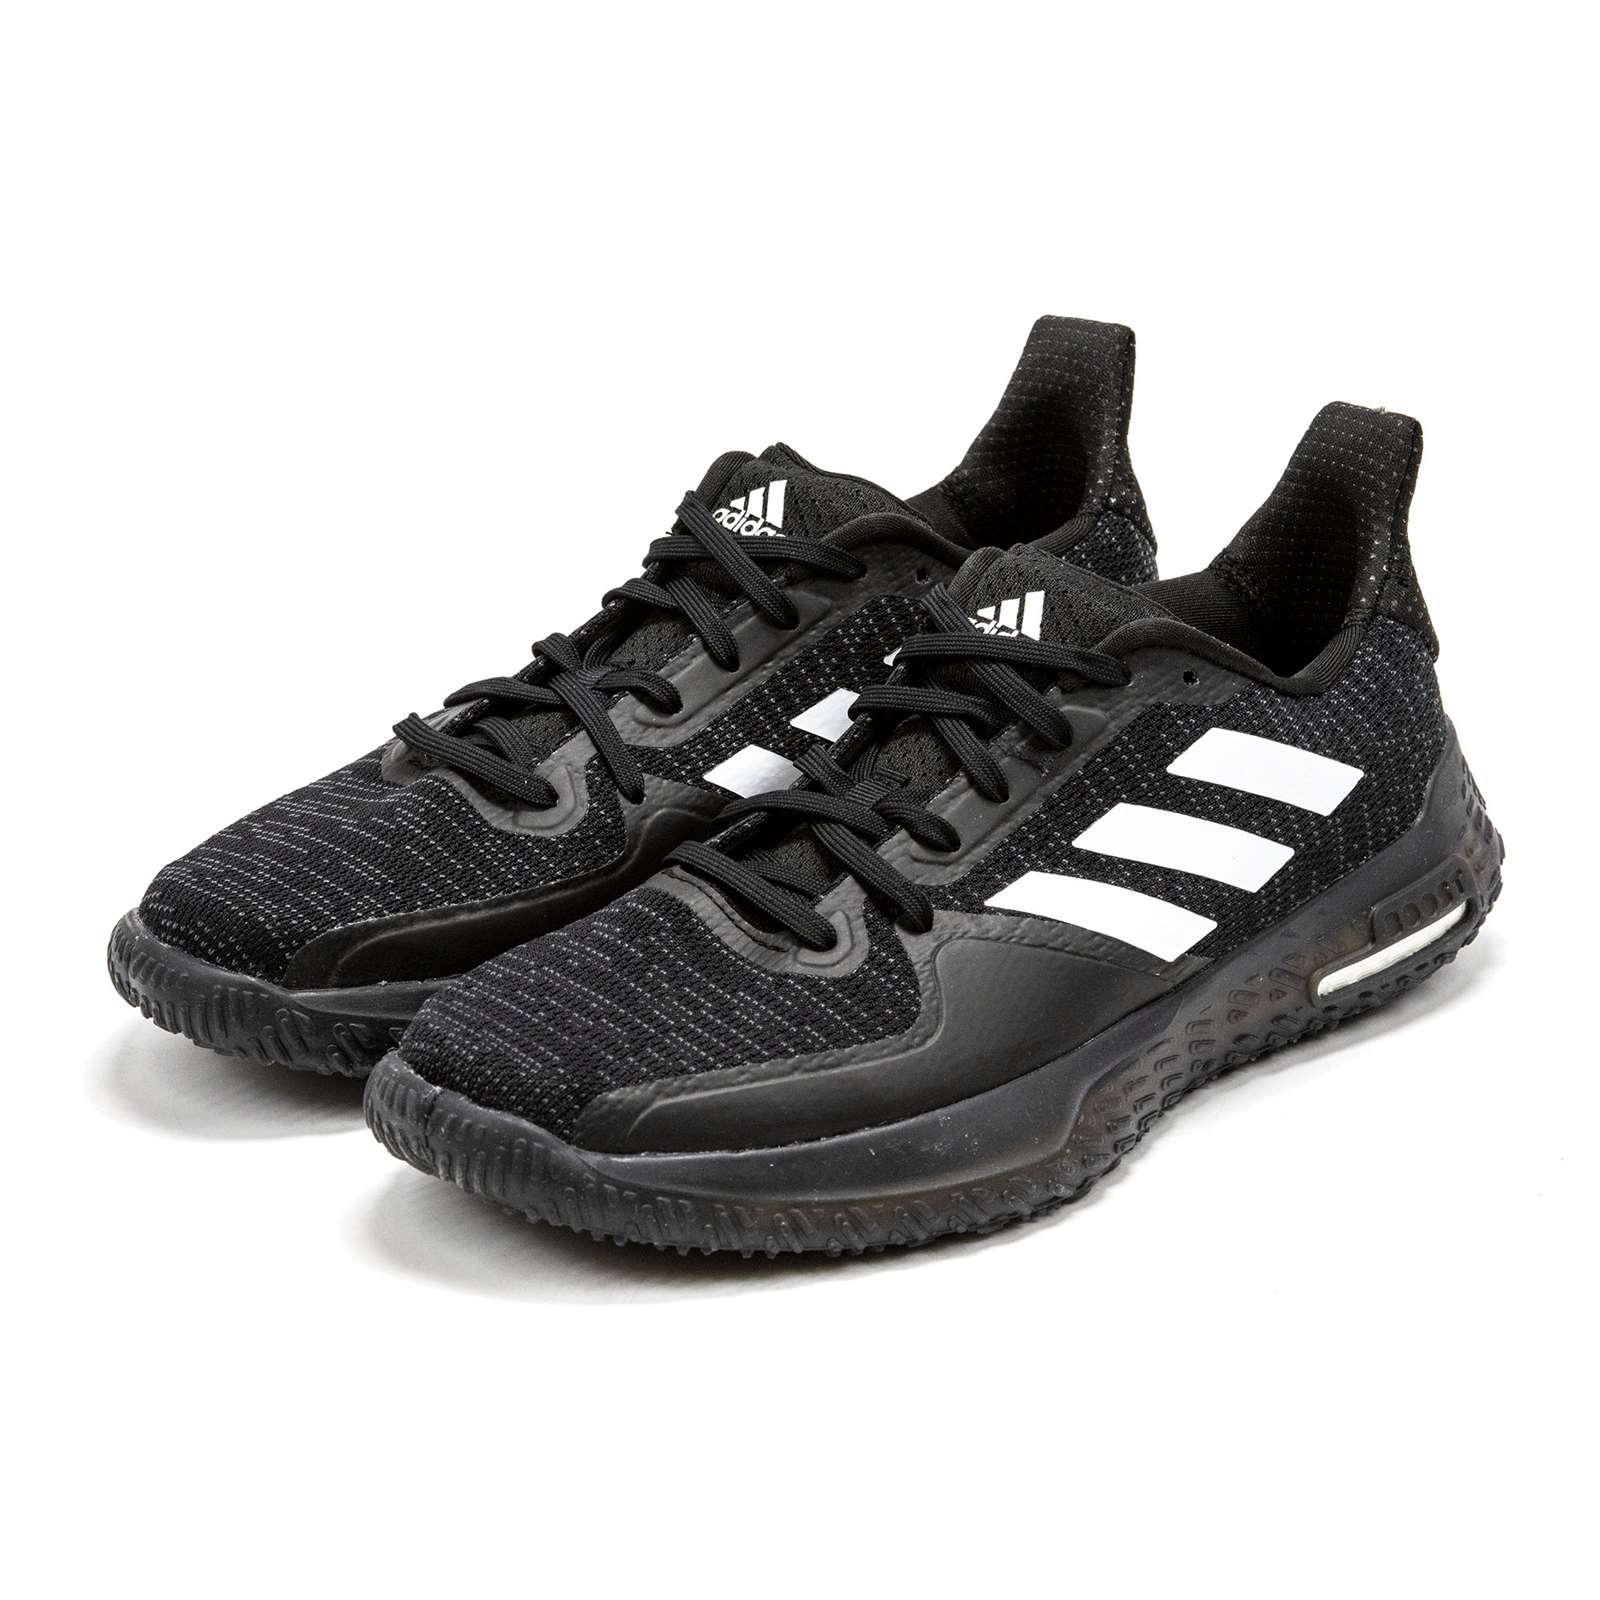 Adidas Men Fitboost Trainer Shoes